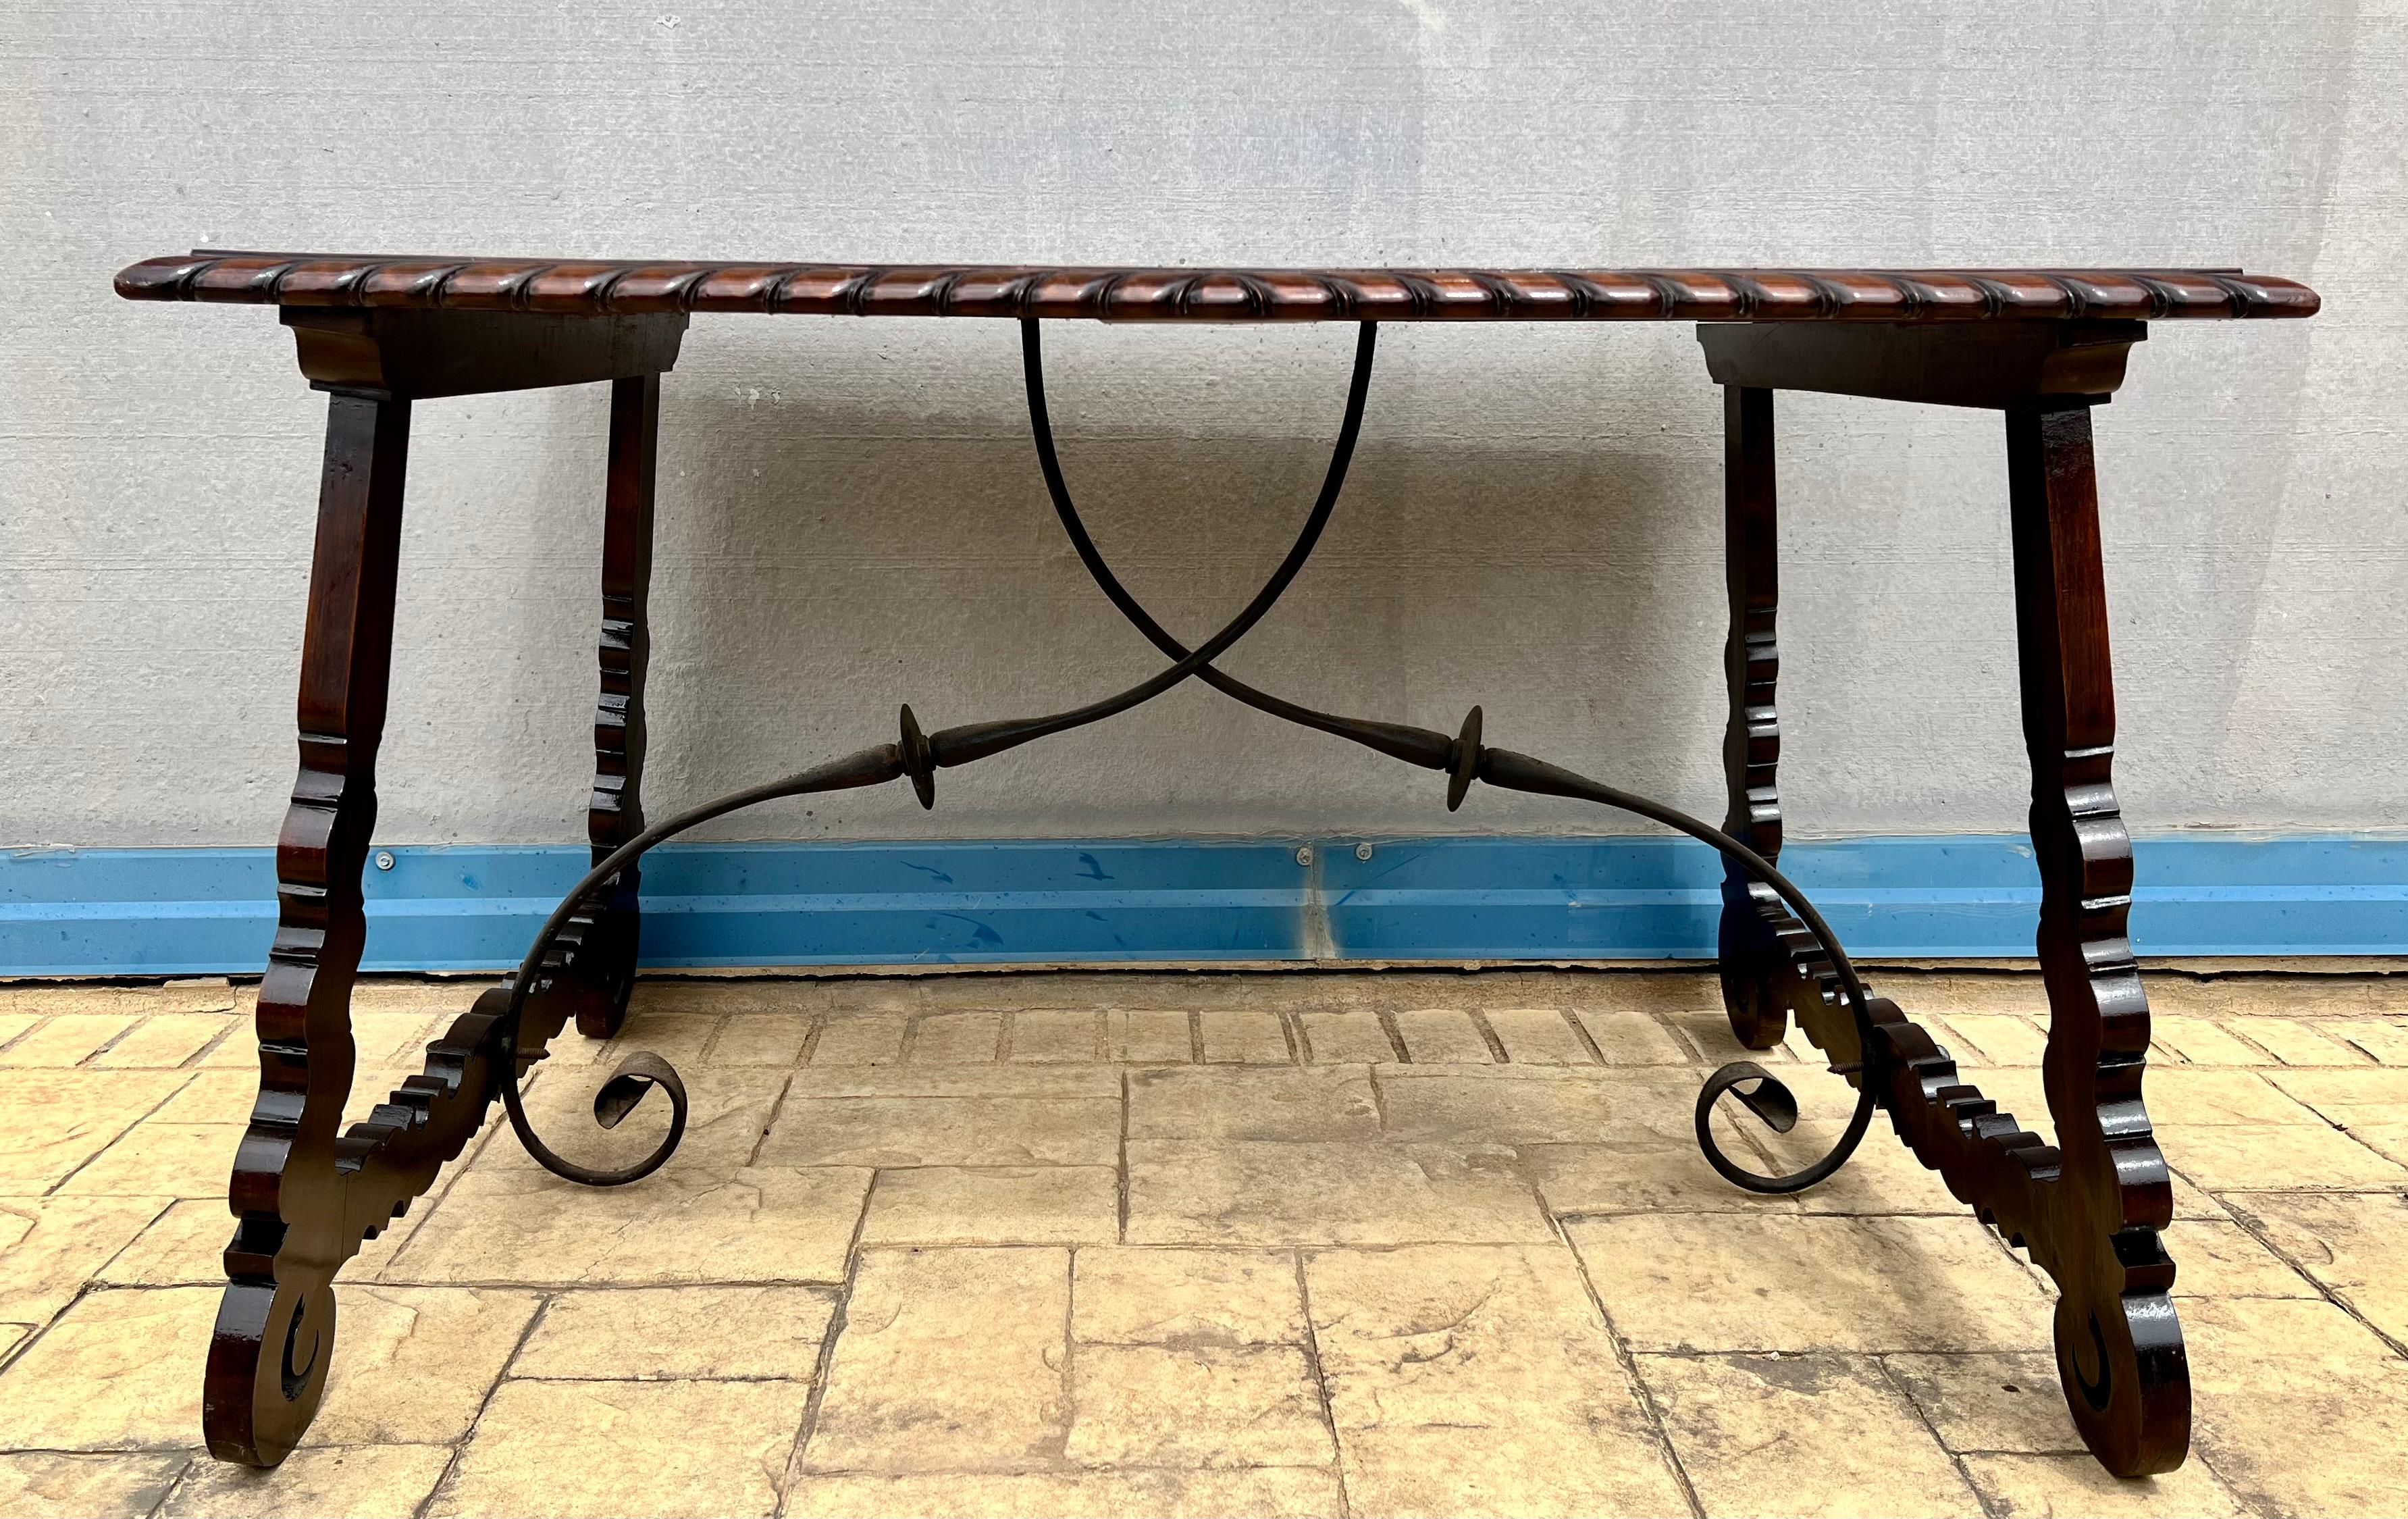 Baroque 18th Century Refectory Spanish Table with Lyre Legs and Iron Stretcher